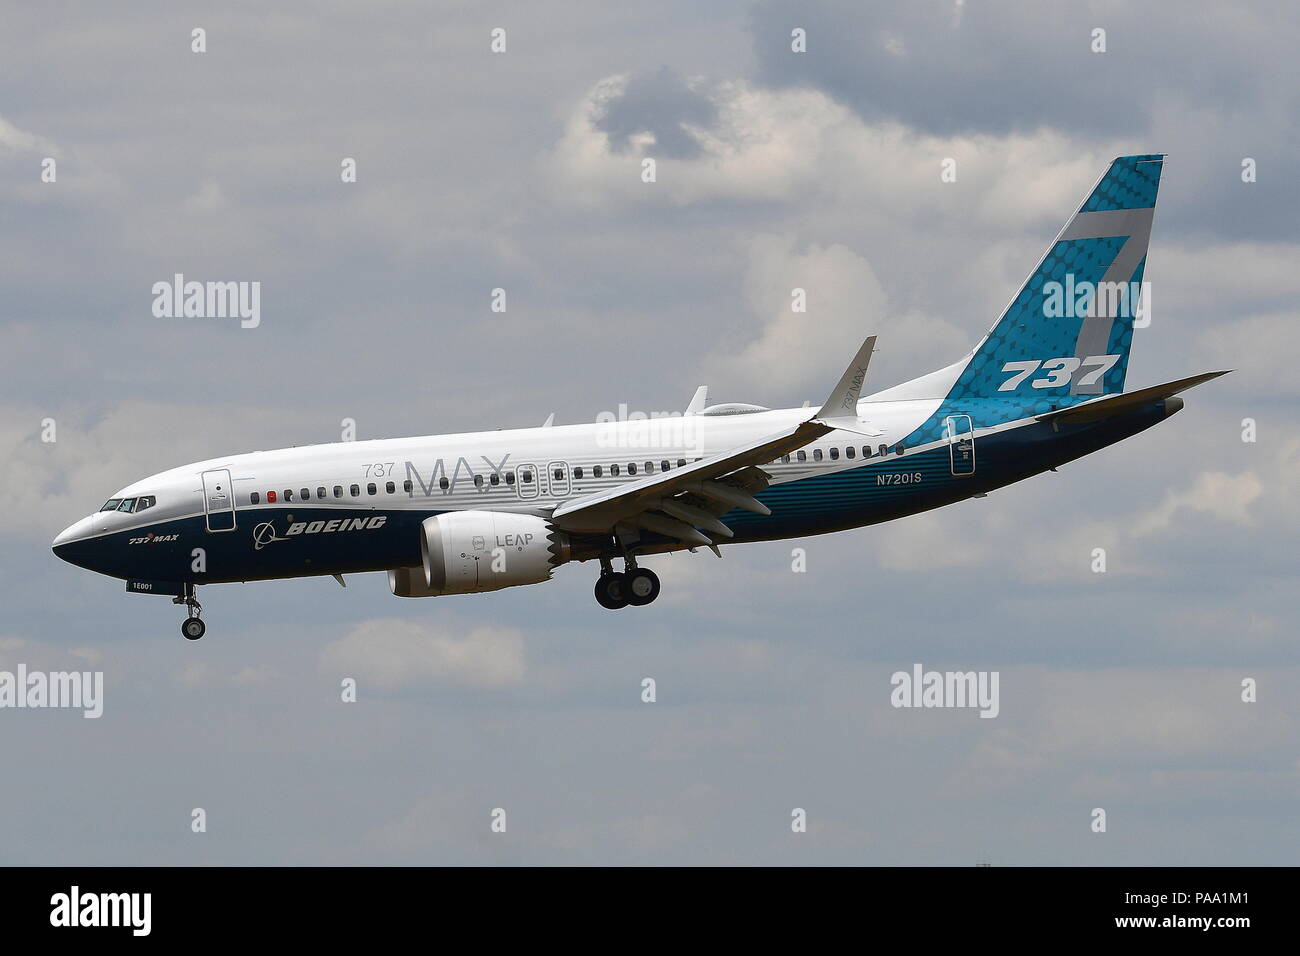 BOEING COMMERCIAL 737-MAX7 PROTOTYPE AND DEMONSTRATOR AT FARNBOROUGH AIRSHOW. Stock Photo